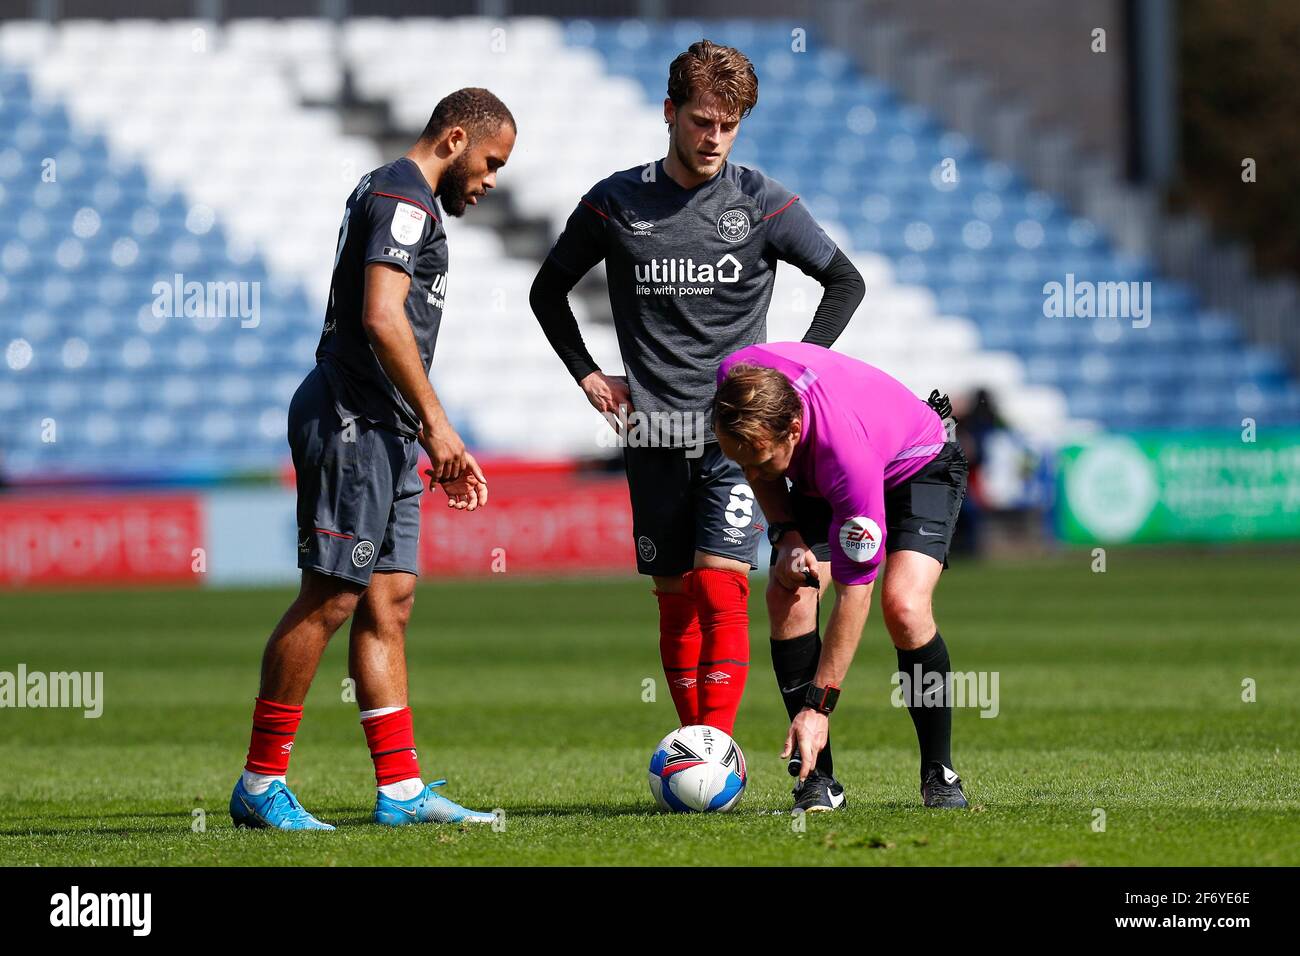 Referee Oliver Langford prepares the free kick for Mathias Jensen #8 of Brentford  in Huddersfield, UK on 4/3/2021. (Photo by James Heaton/News Images/Sipa USA) Stock Photo